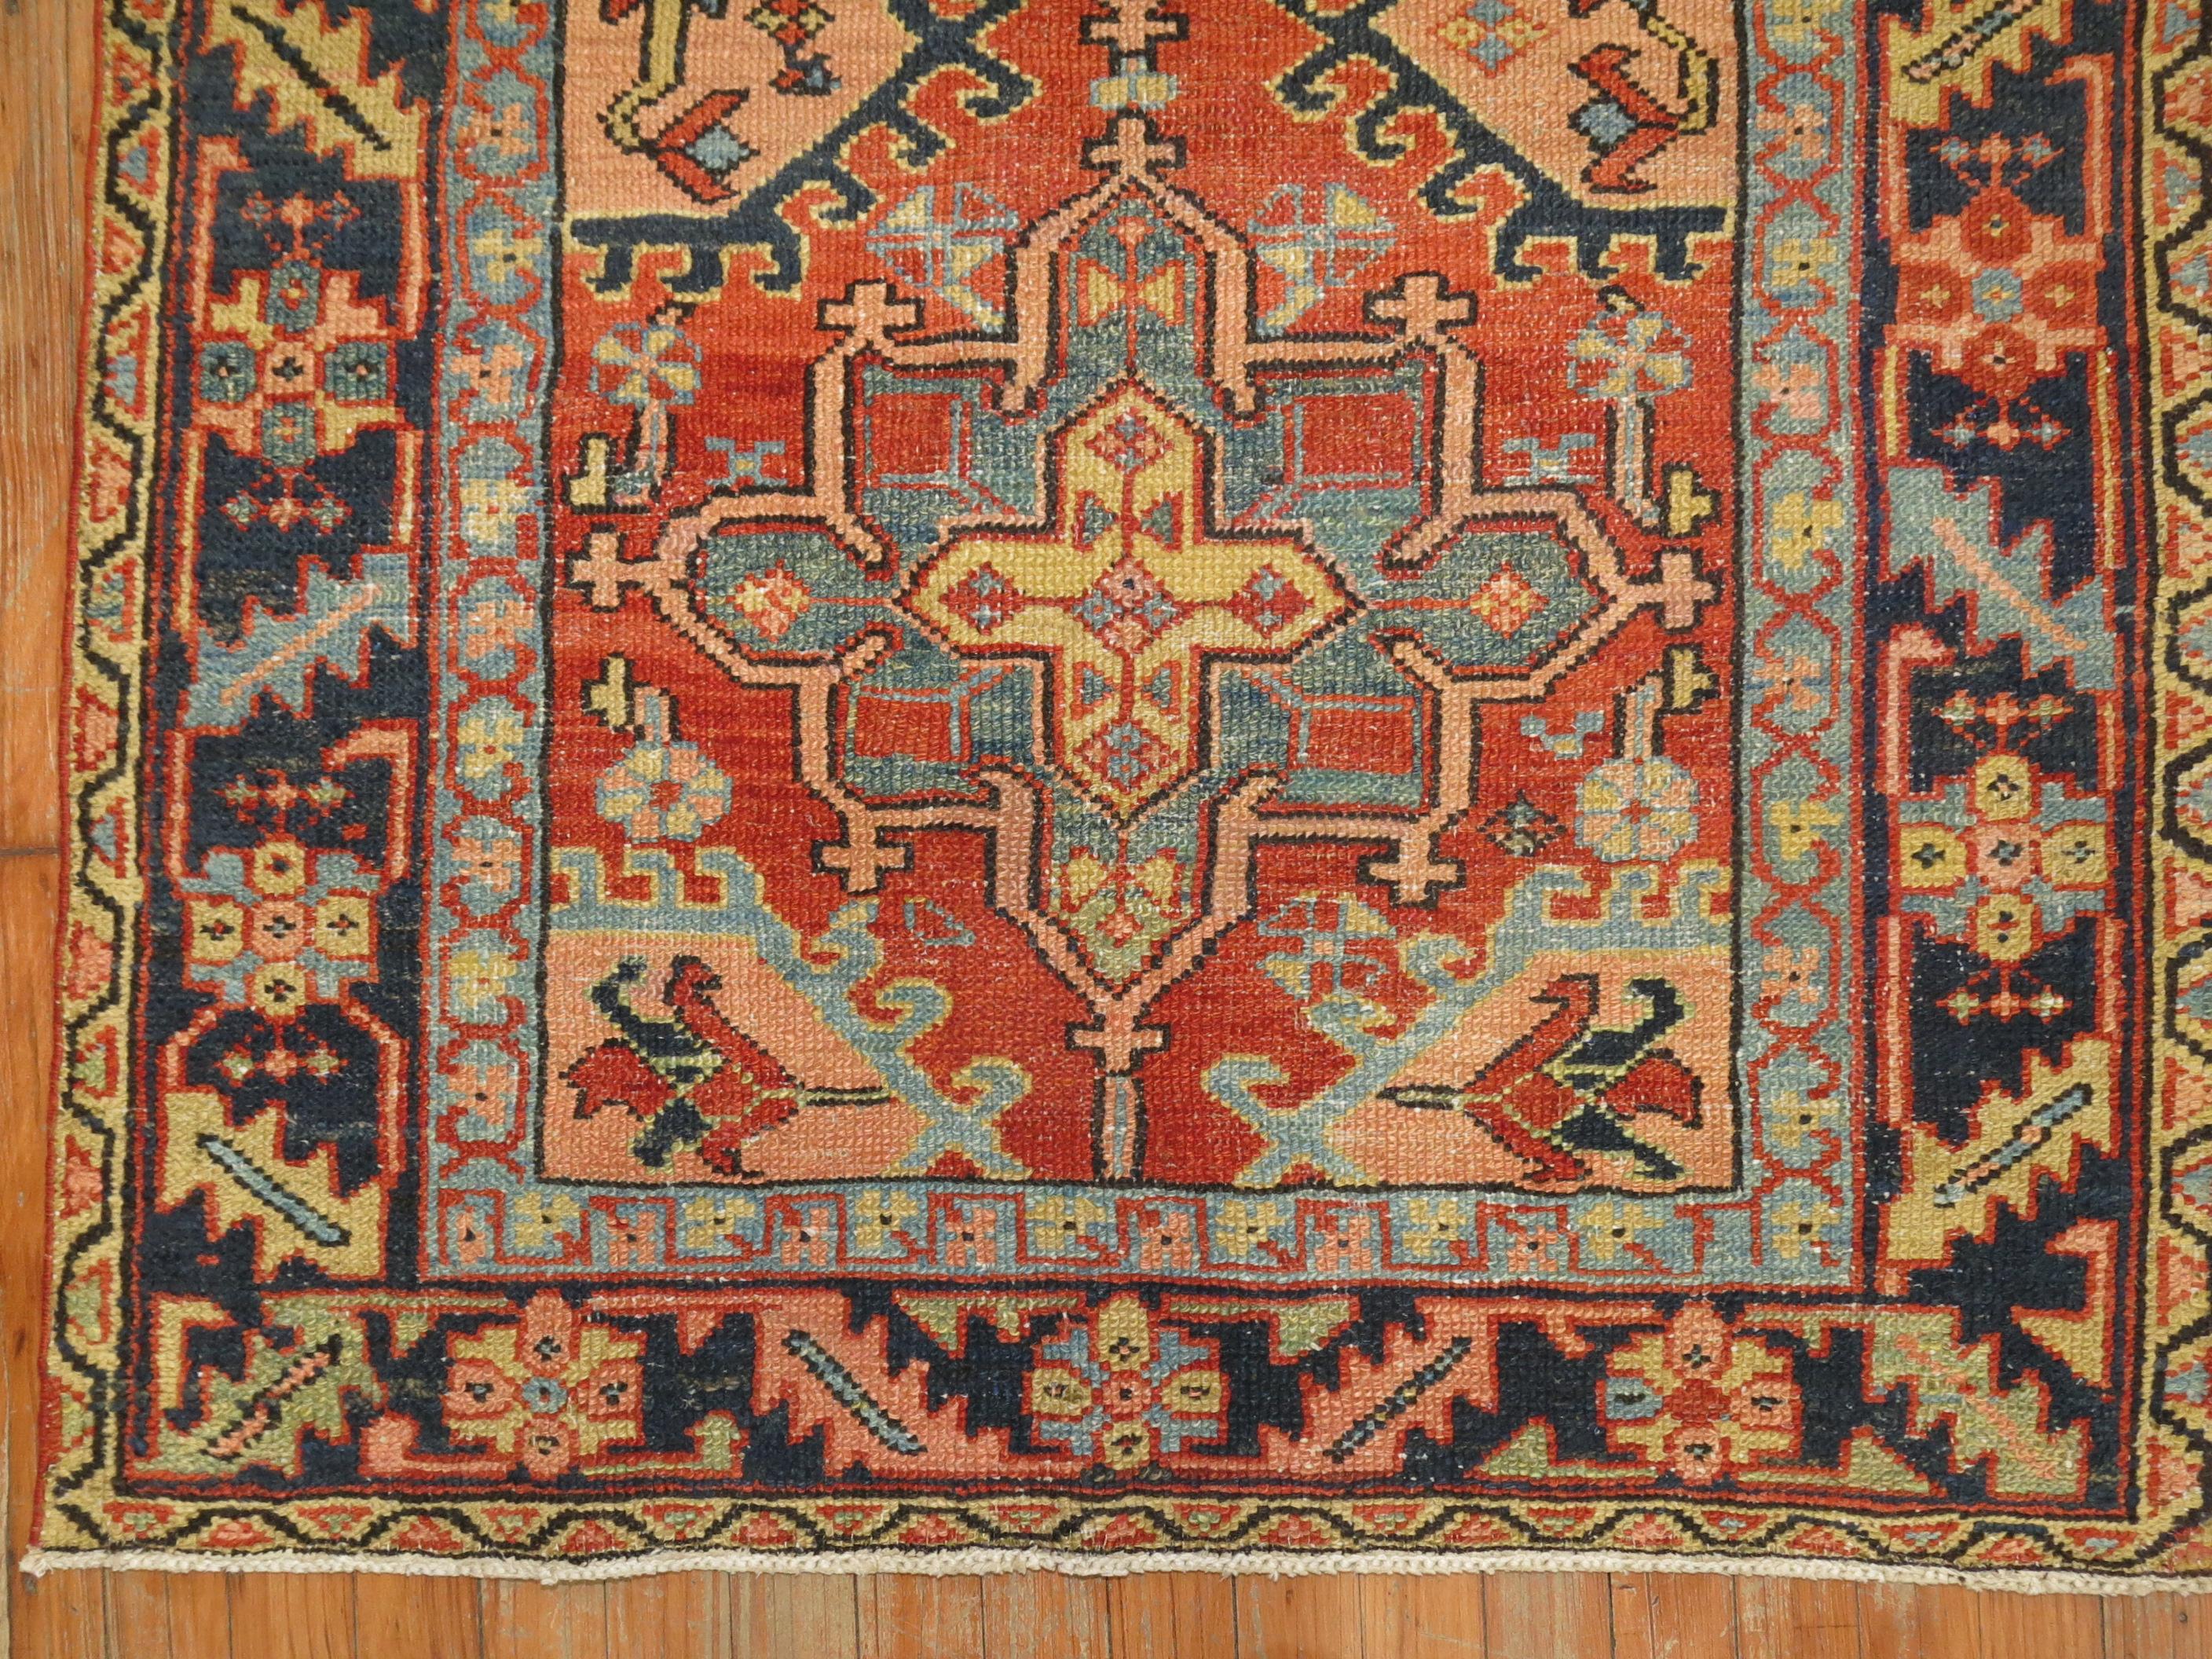 Traditional Persian Heriz Tribal scatter rug in rustic tones from the early 20th century

Measures: 3'5” x 4'5”.